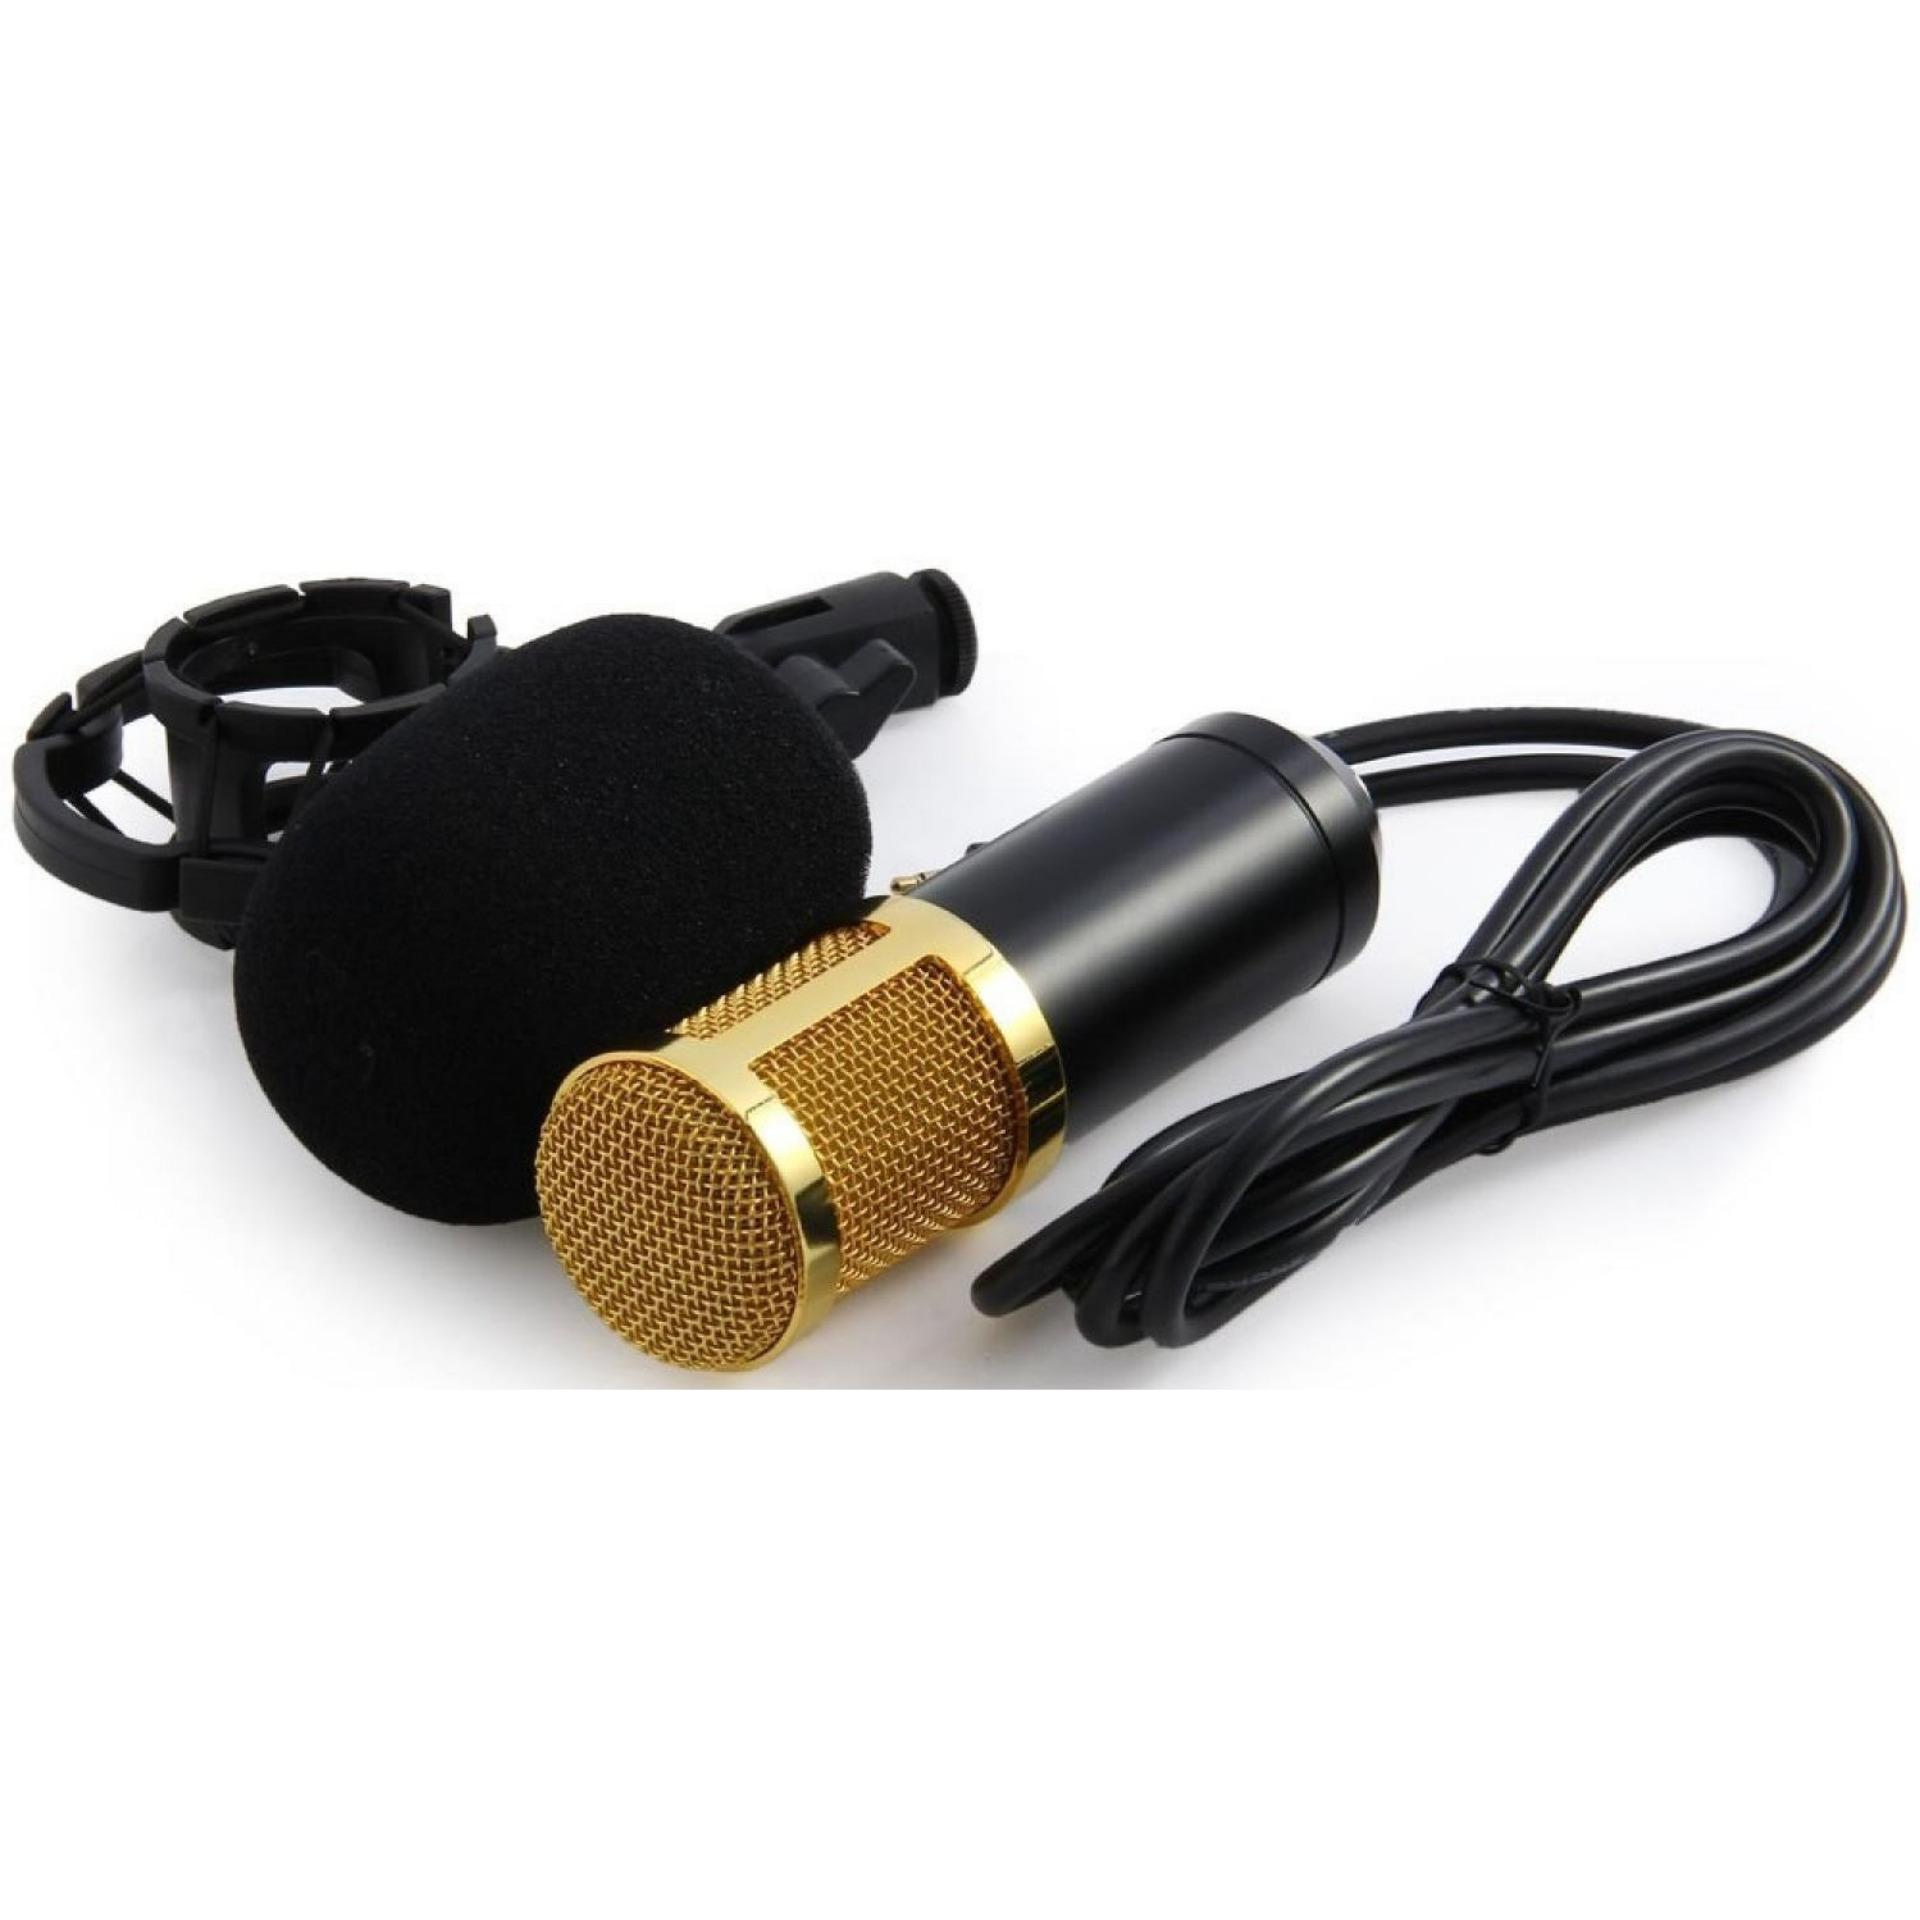 BM800 Condenser Microphone Sound Recording With Mic Shock Mount3.5Mm Audio Cable Foam Cap For Pc Laptop Radio Broadcasting Studio voice-Over Sound Recording